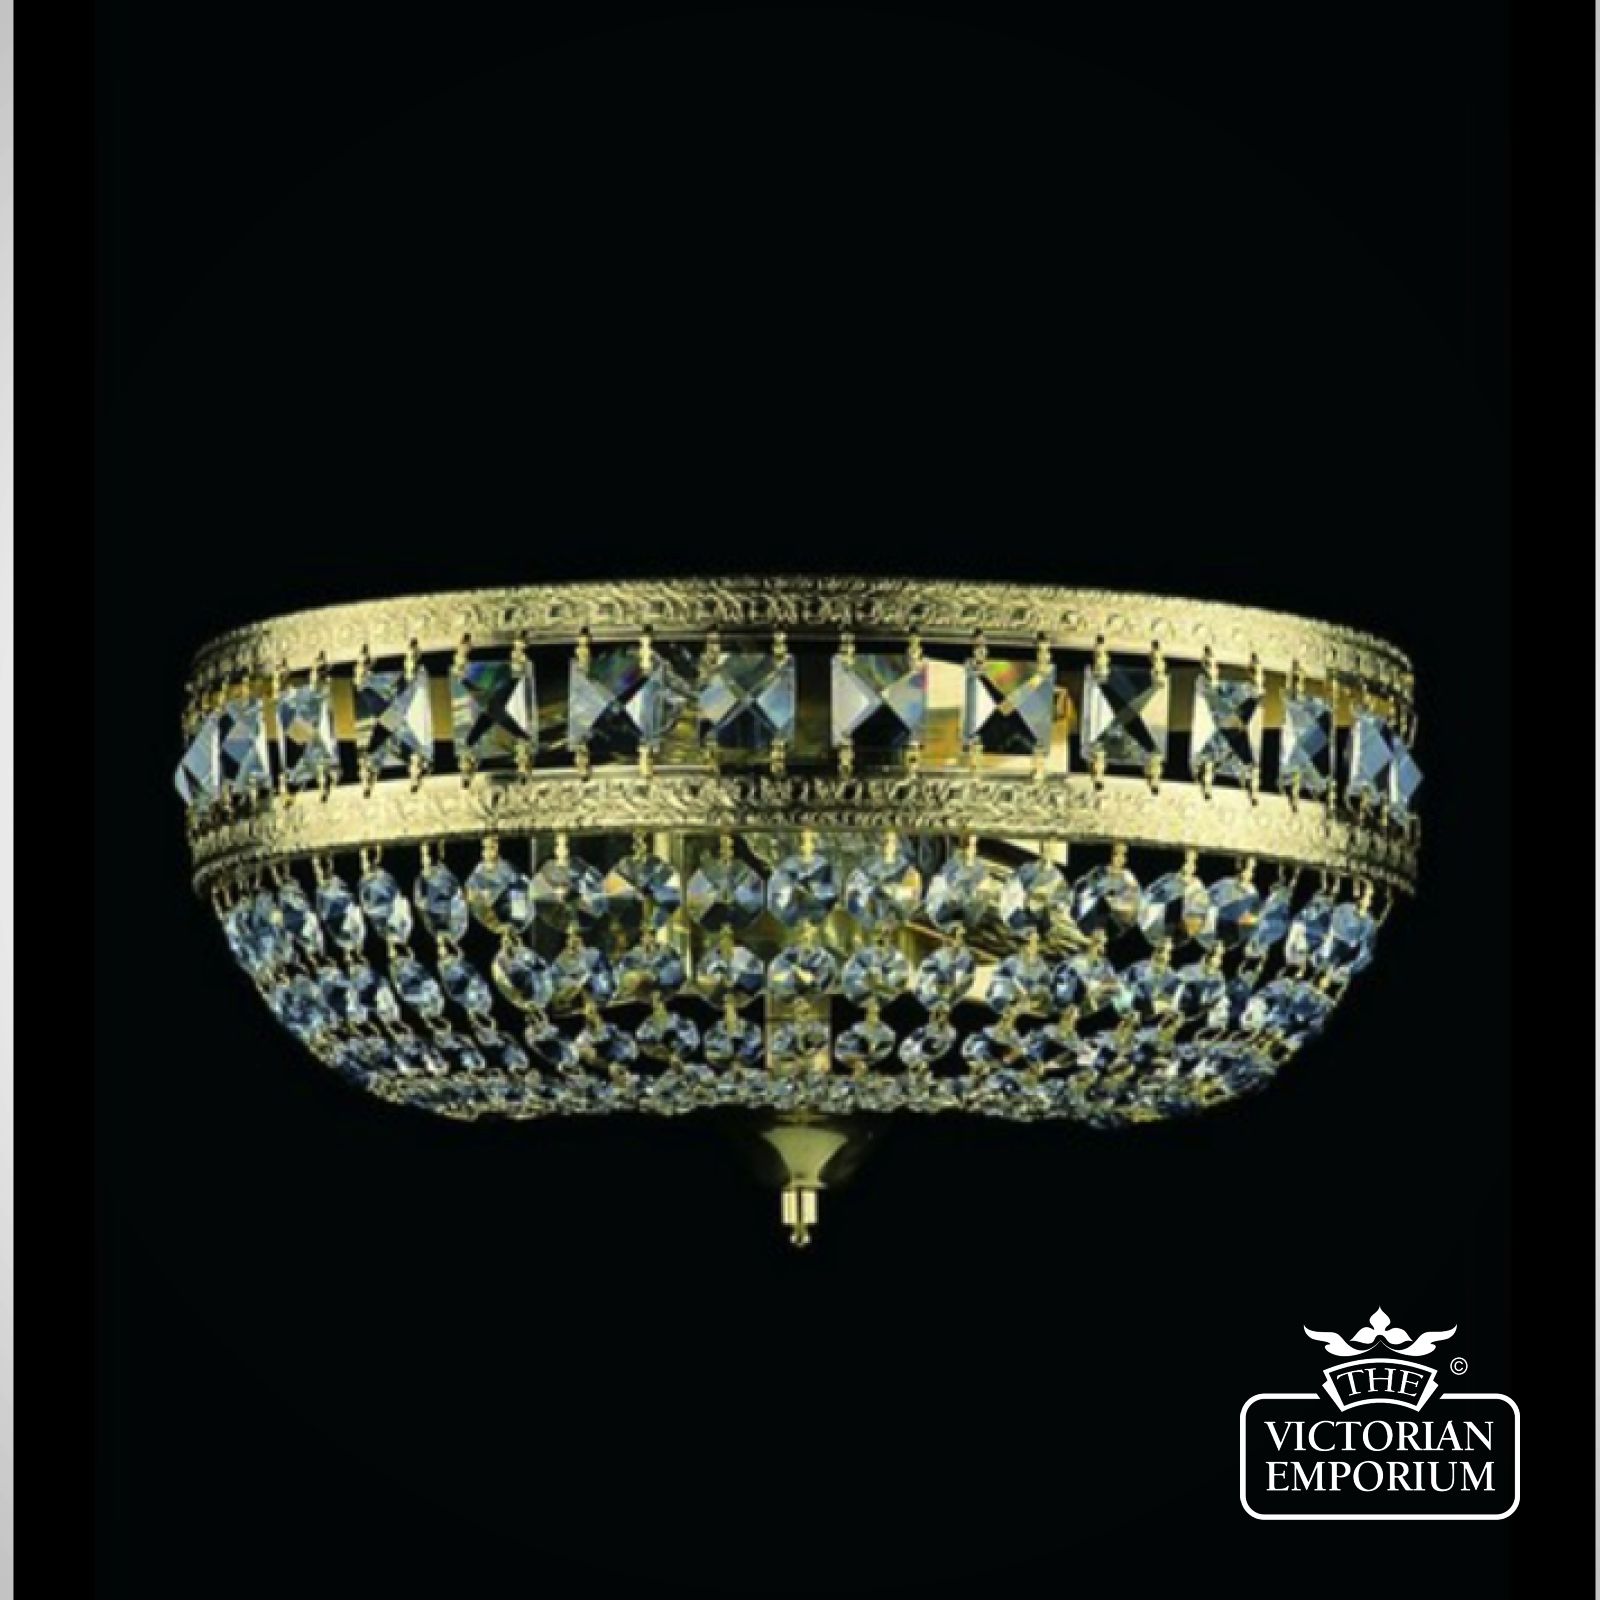 Ivona Crystal Wall Light - With Shimmering Crystal Trimmings